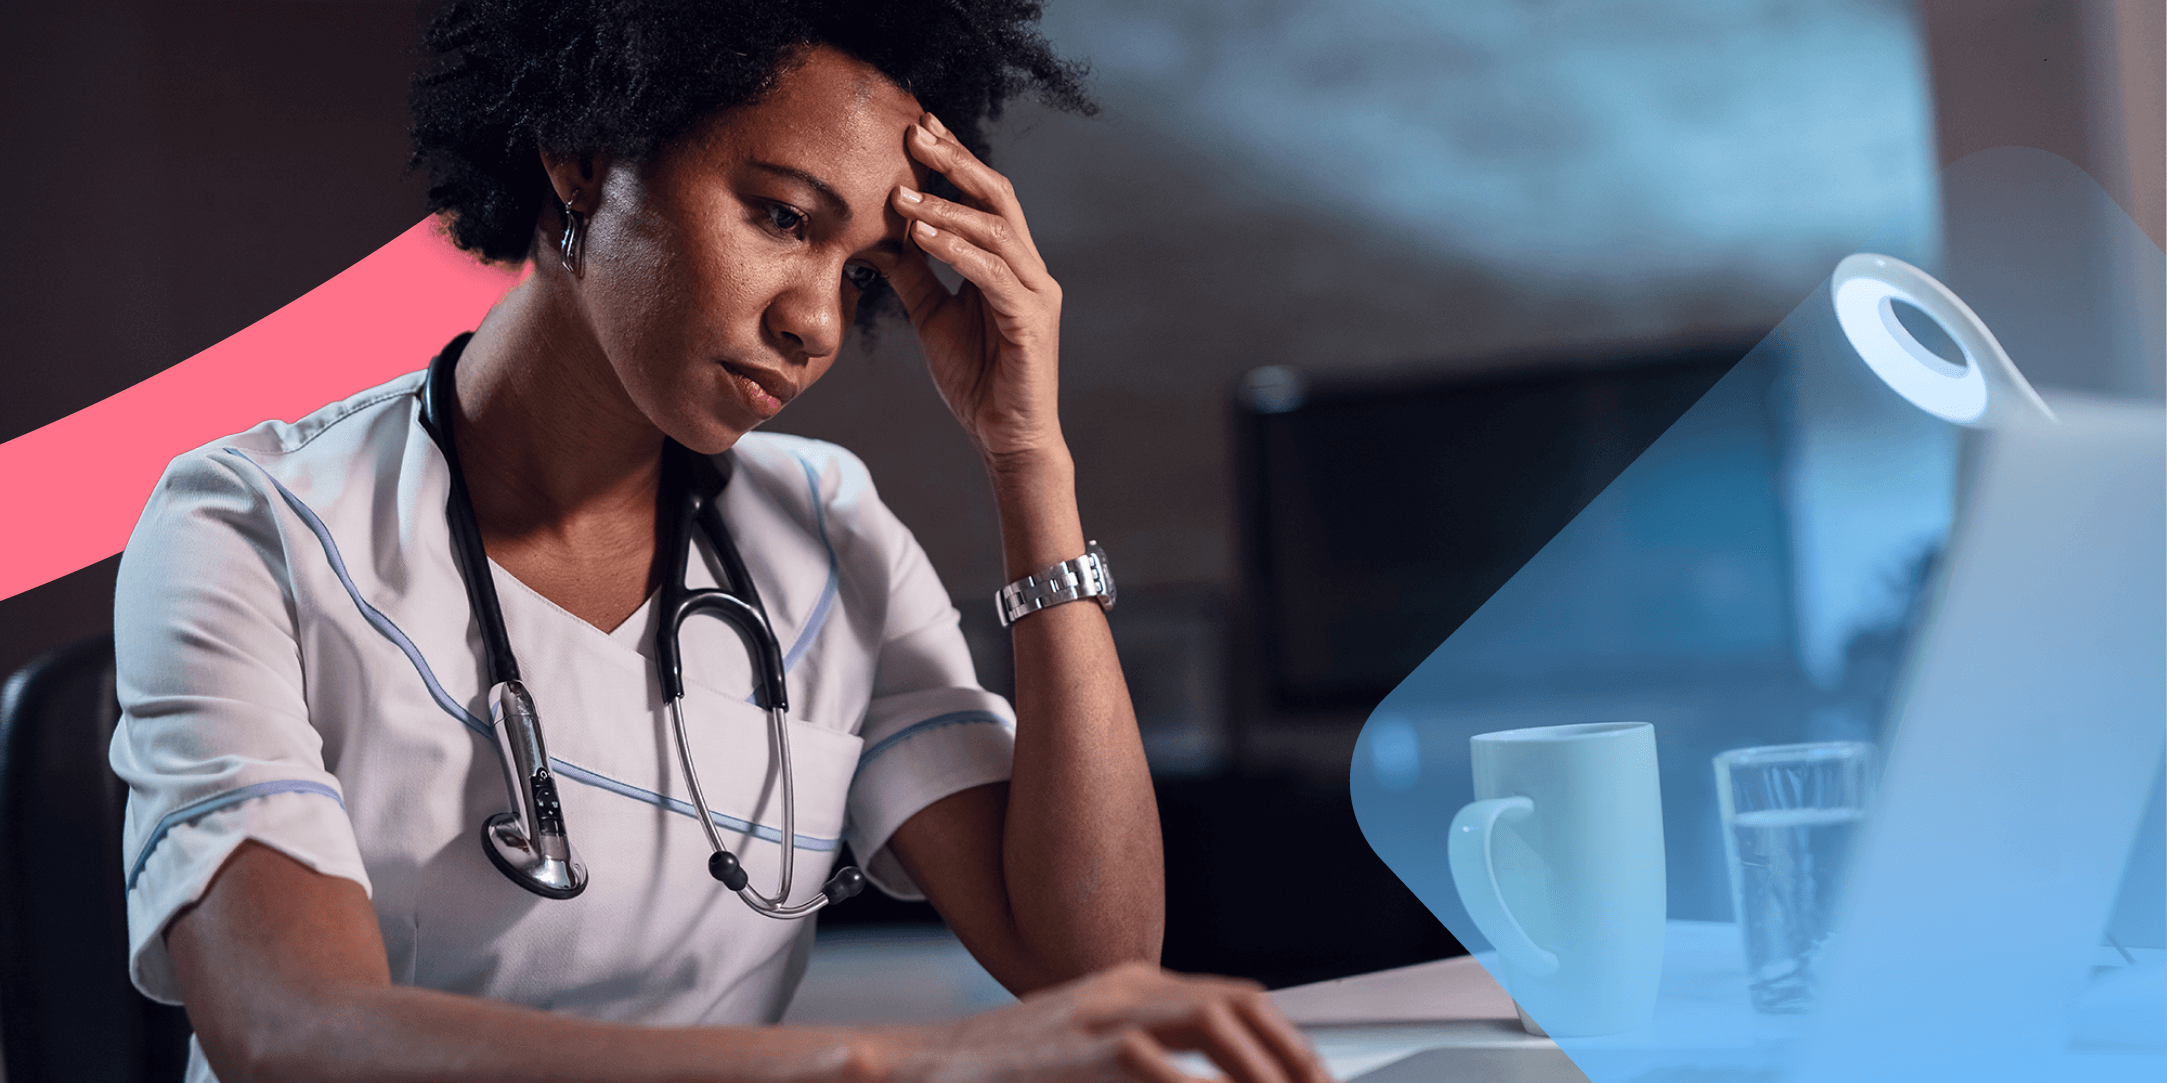 Healthcare burnout is at an all-time high while employee morale is at an all-time low.